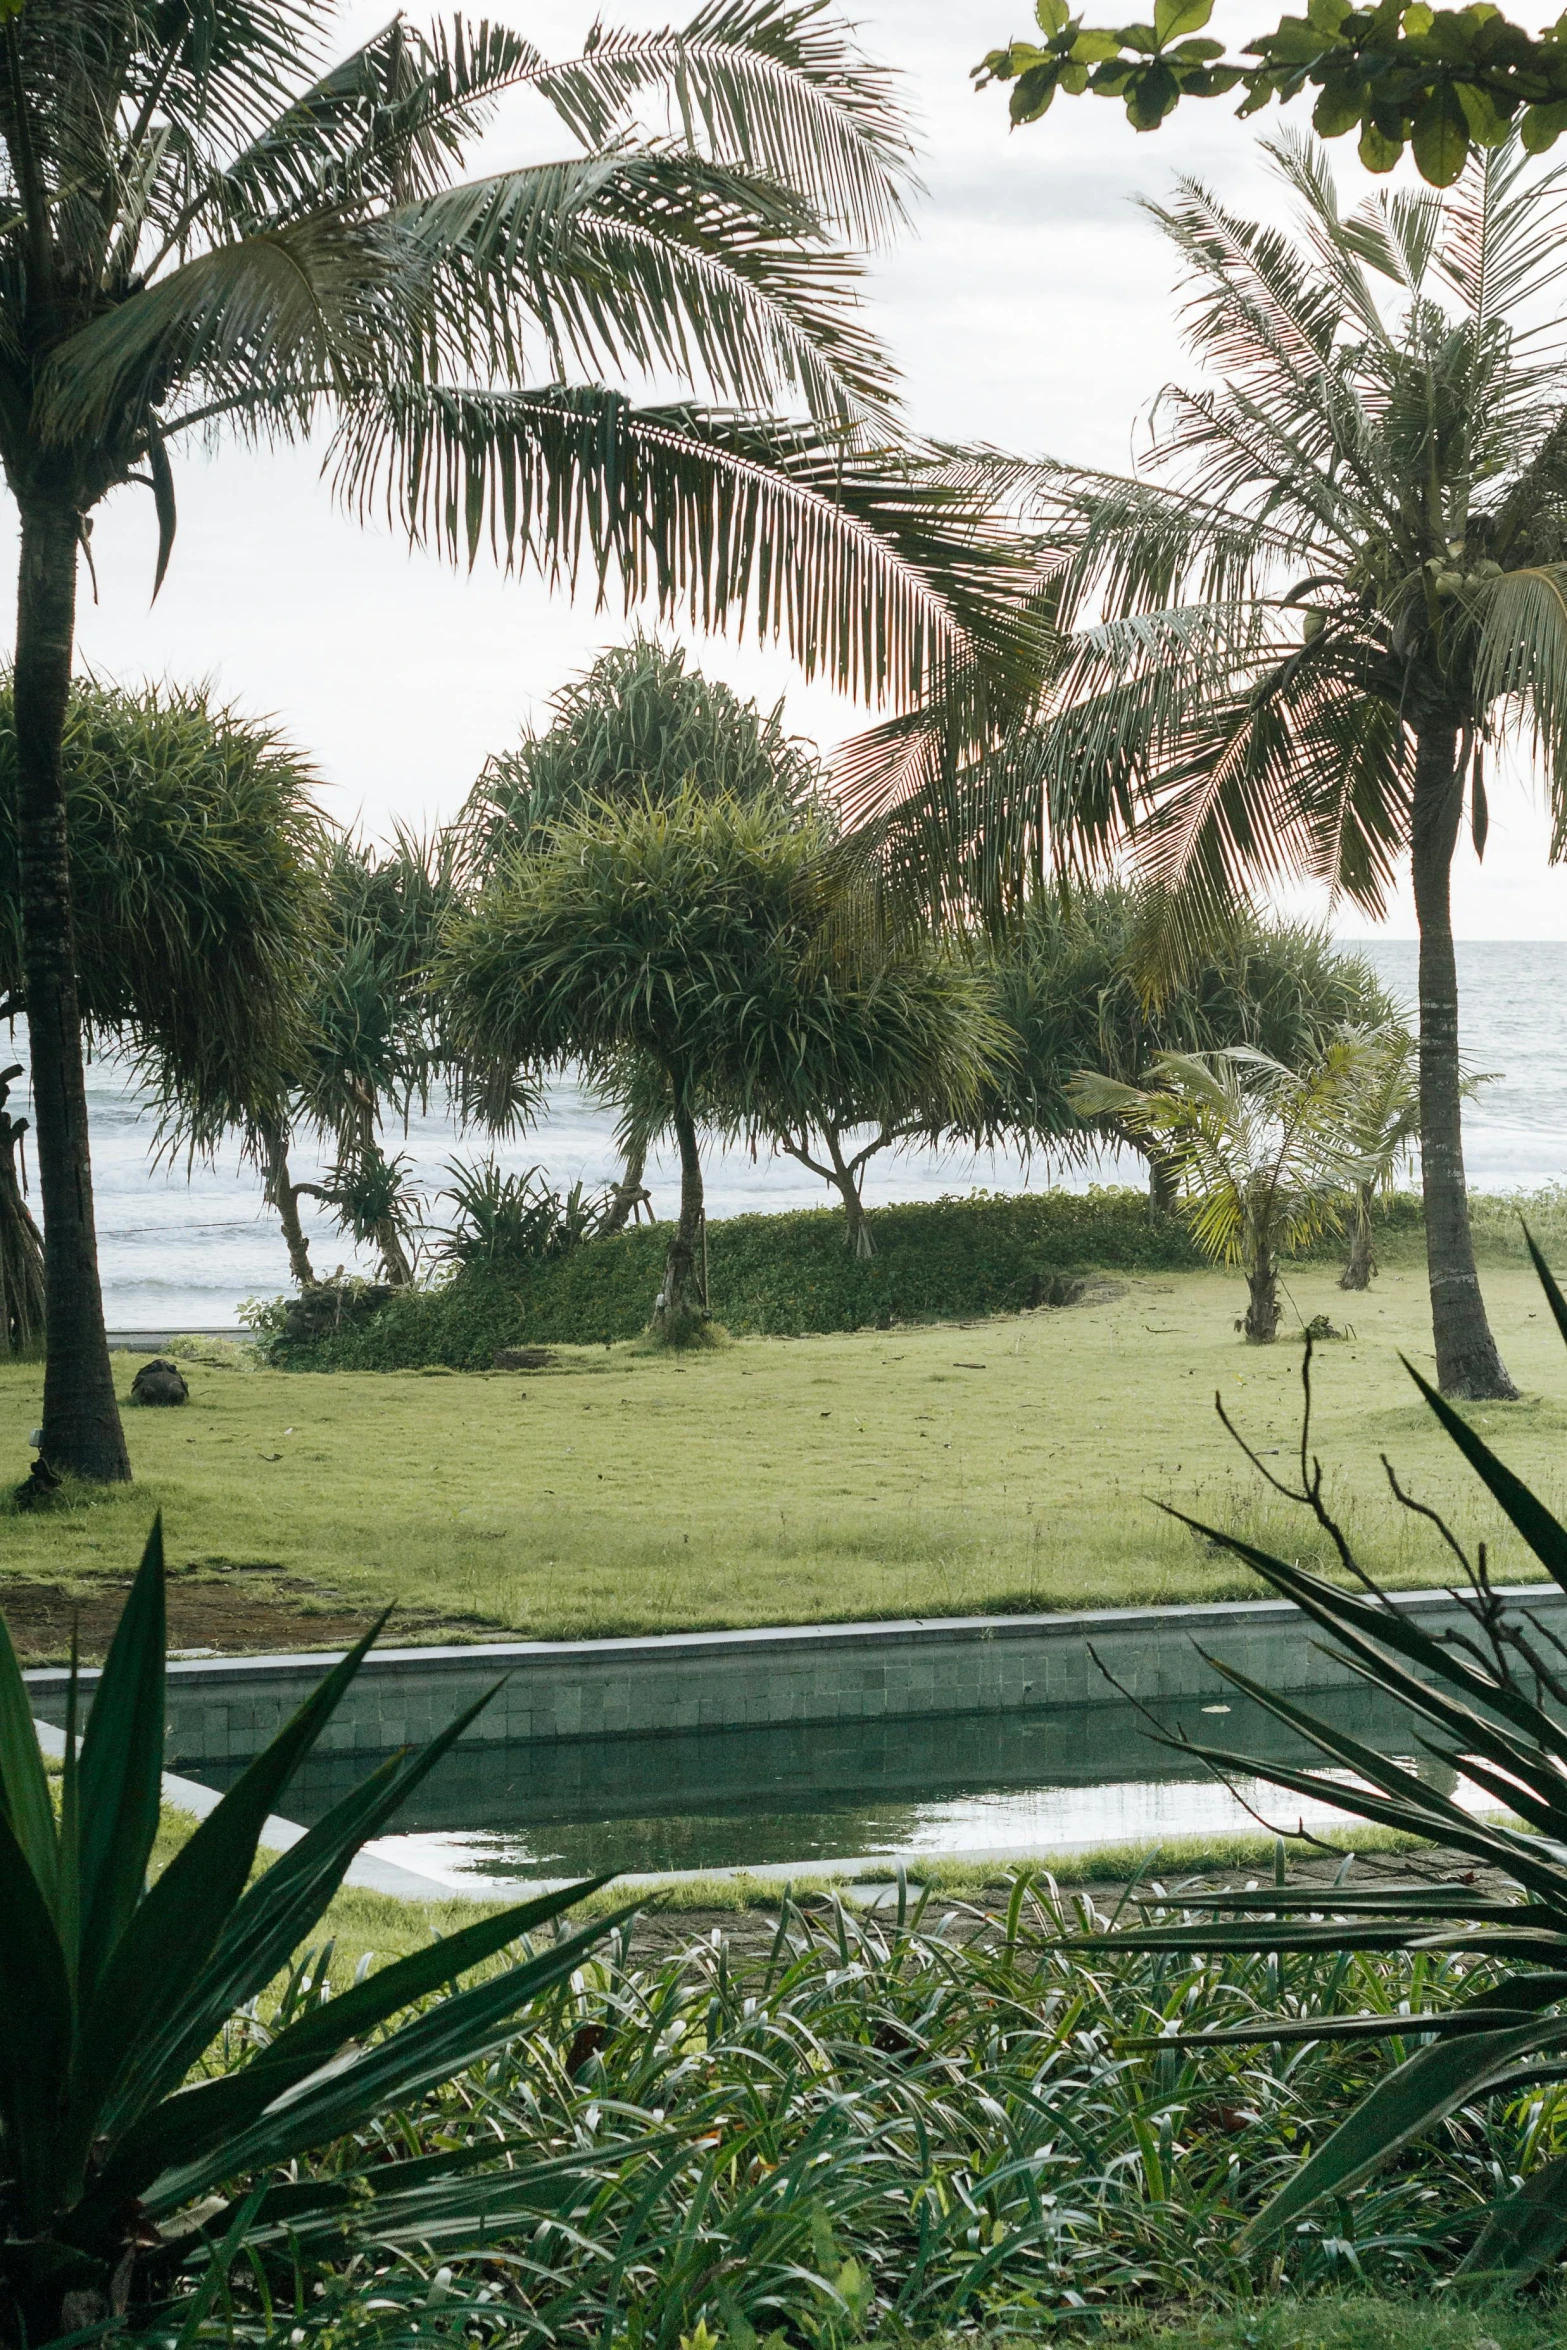 a group of palm trees next to a body of water, renaissance, lush field, views to the ocean, jakarta, grey